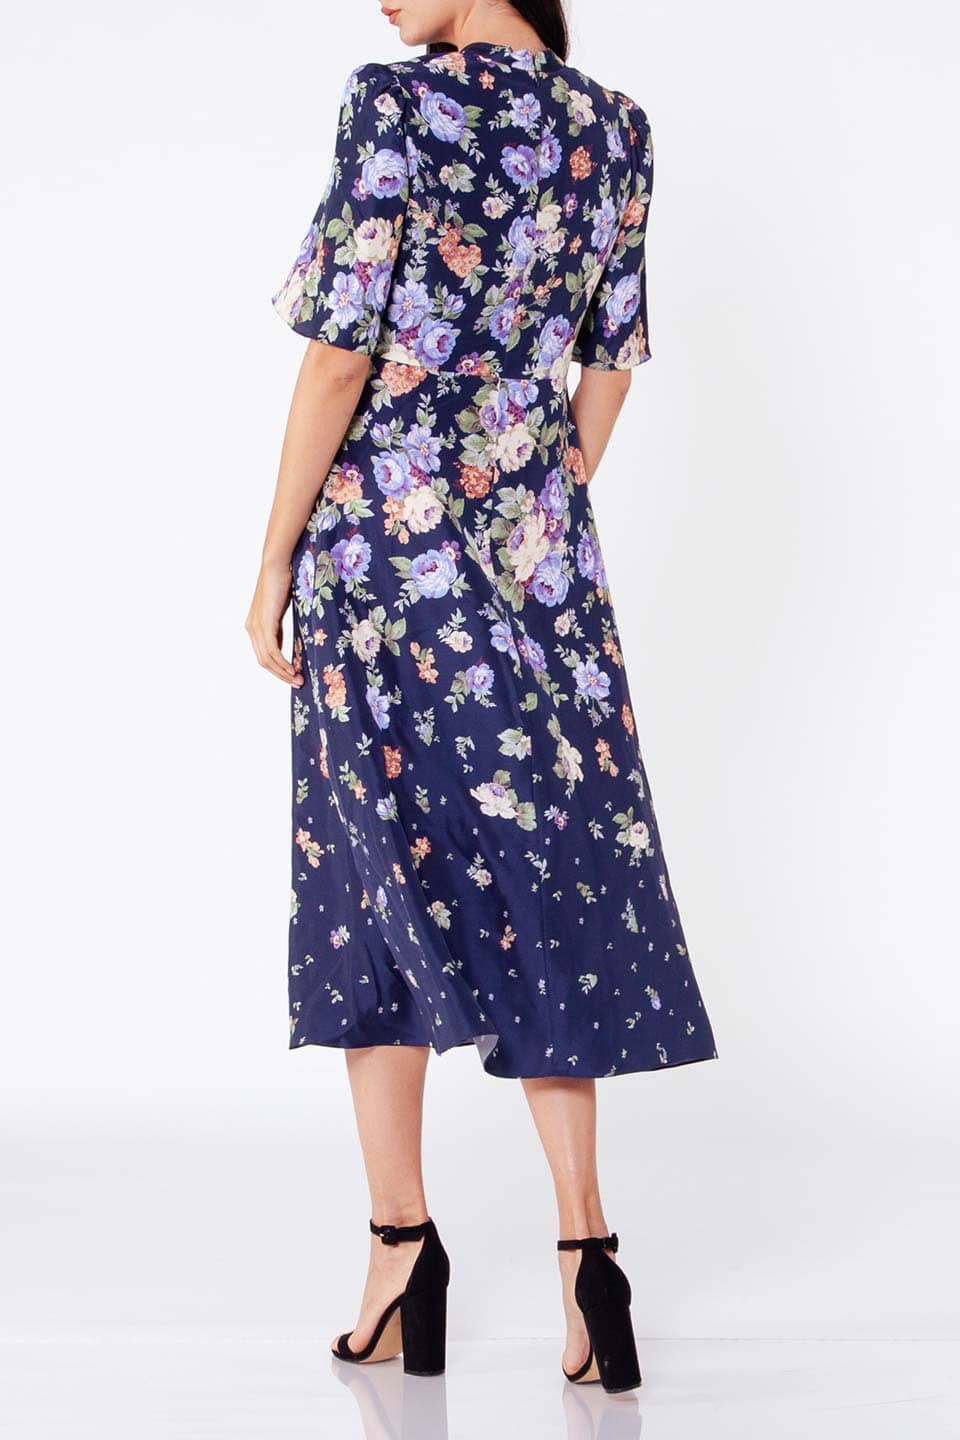 Thumbnail for Product gallery 2, Fashion designer midi dress with floral print on blue color